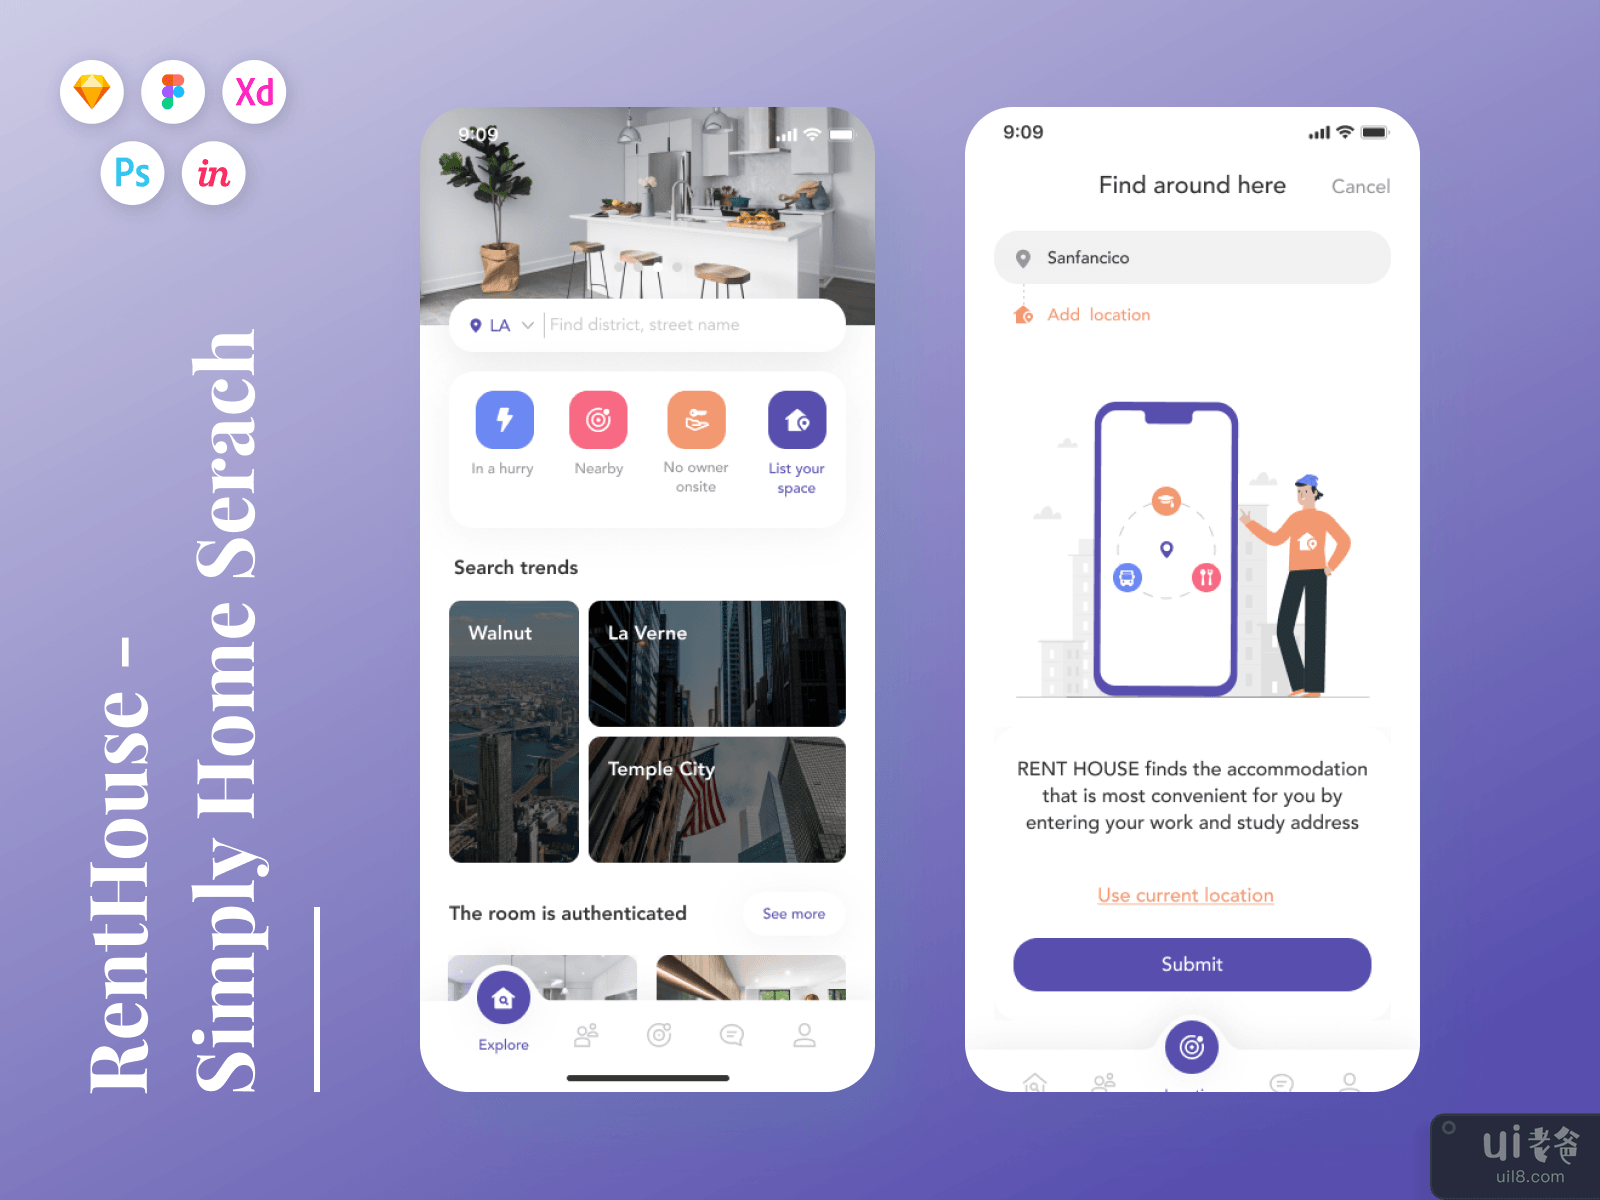 RentHouse - Simply Home Search Mobile App UI KIT #8